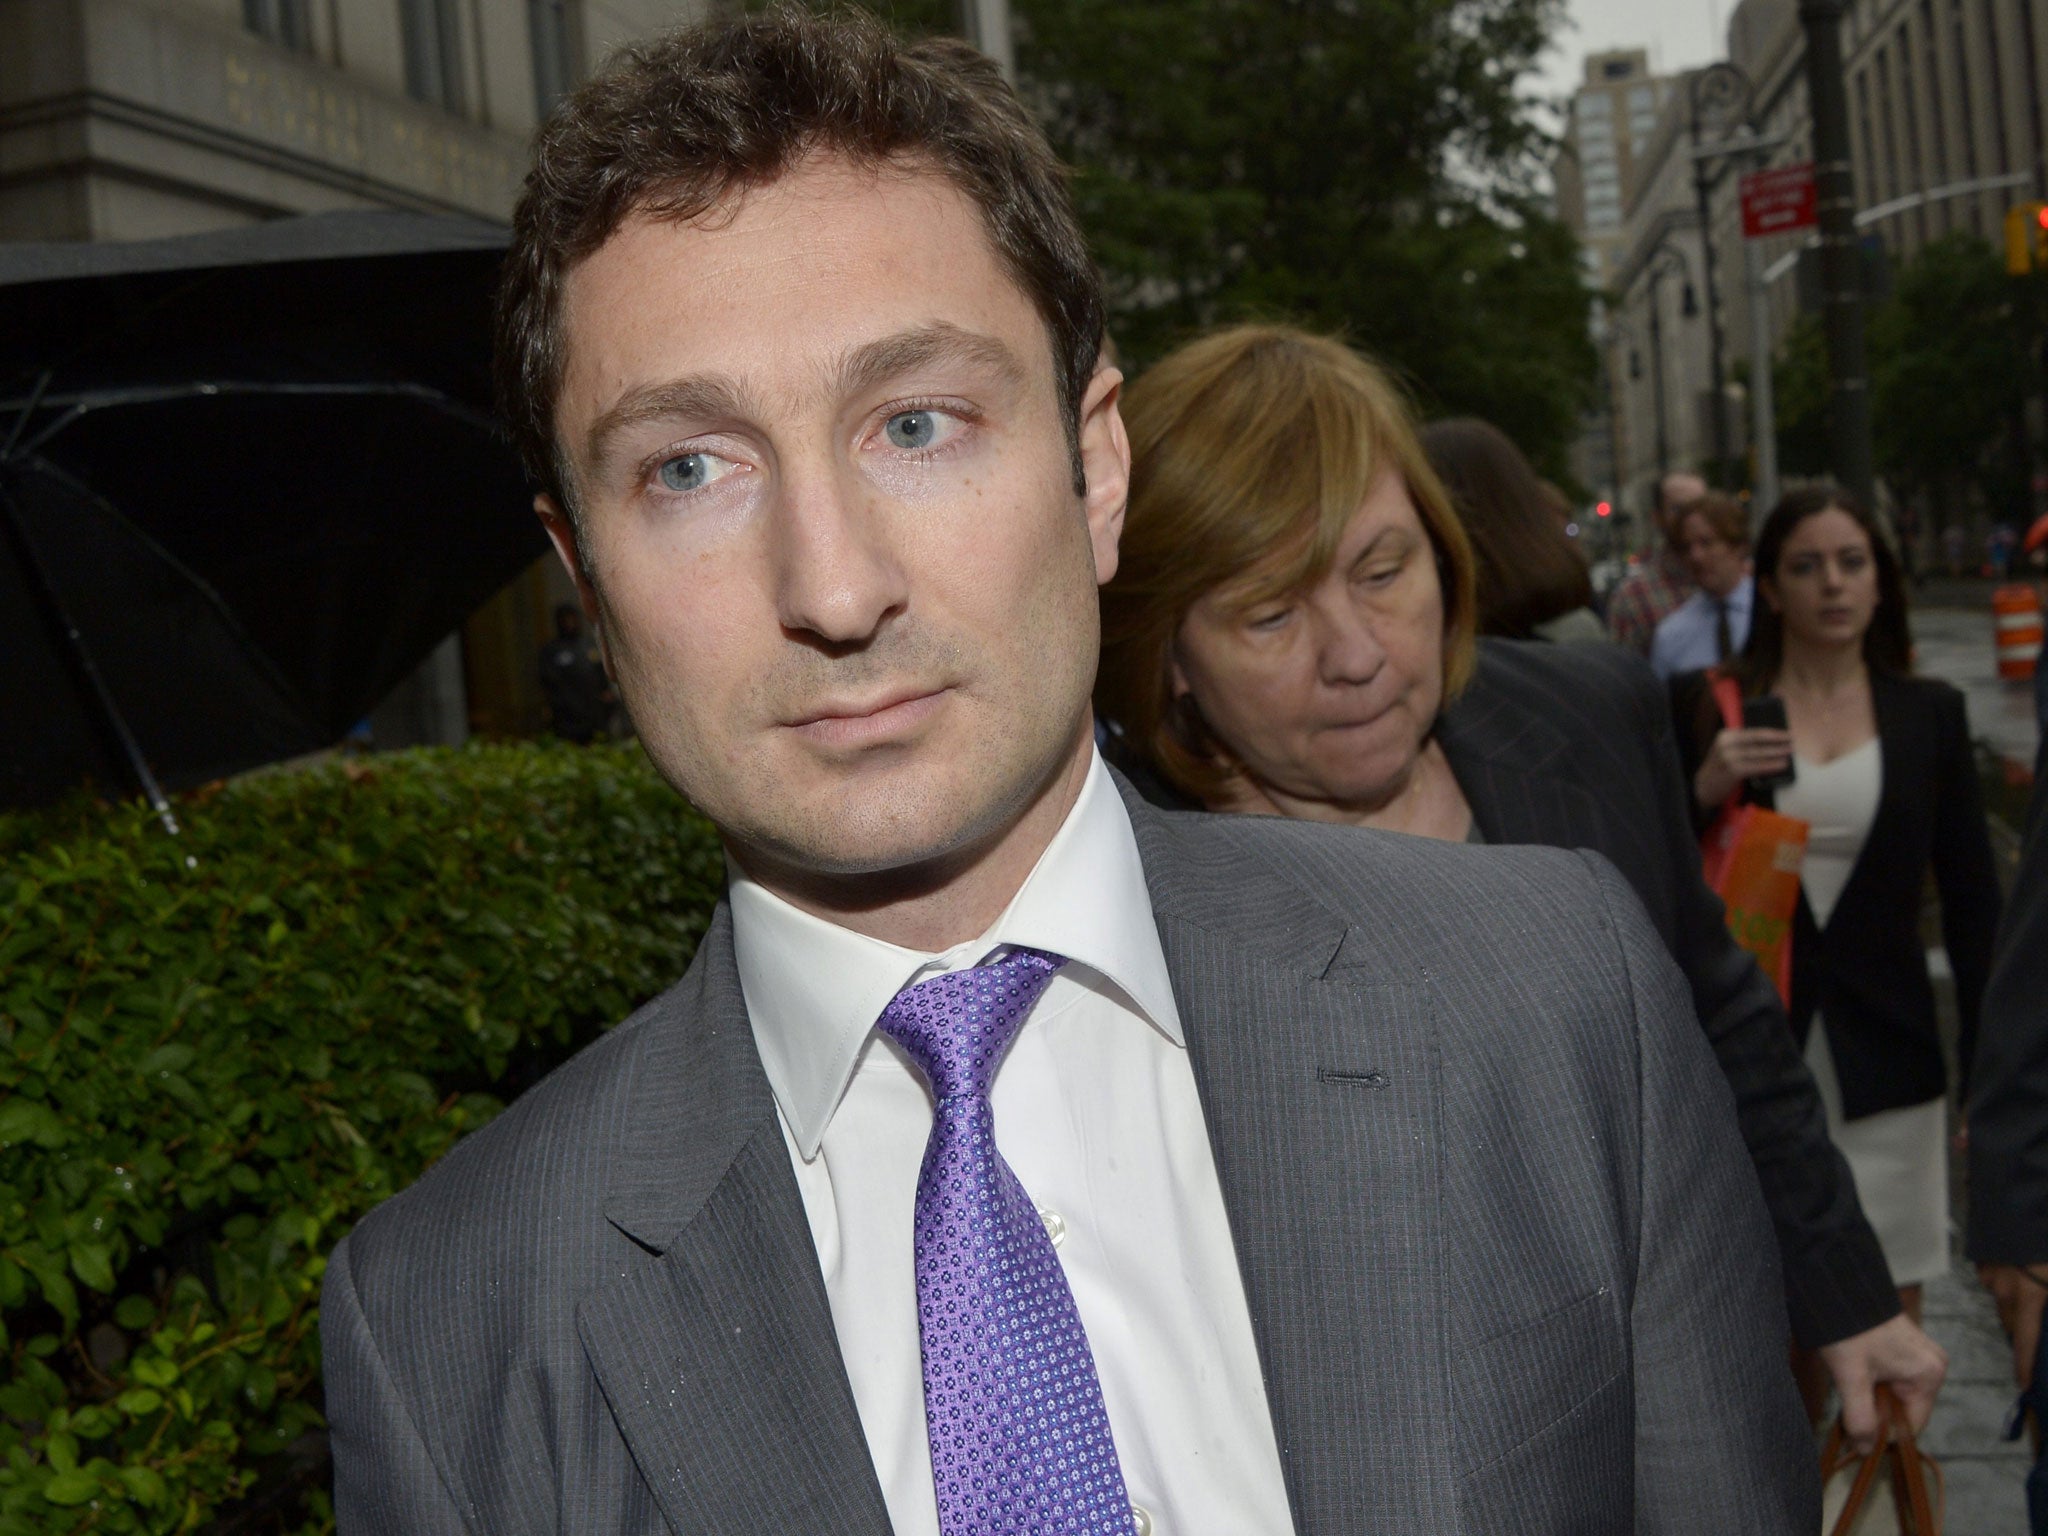 Fabrice Tourre could be barred from working on Wall Street